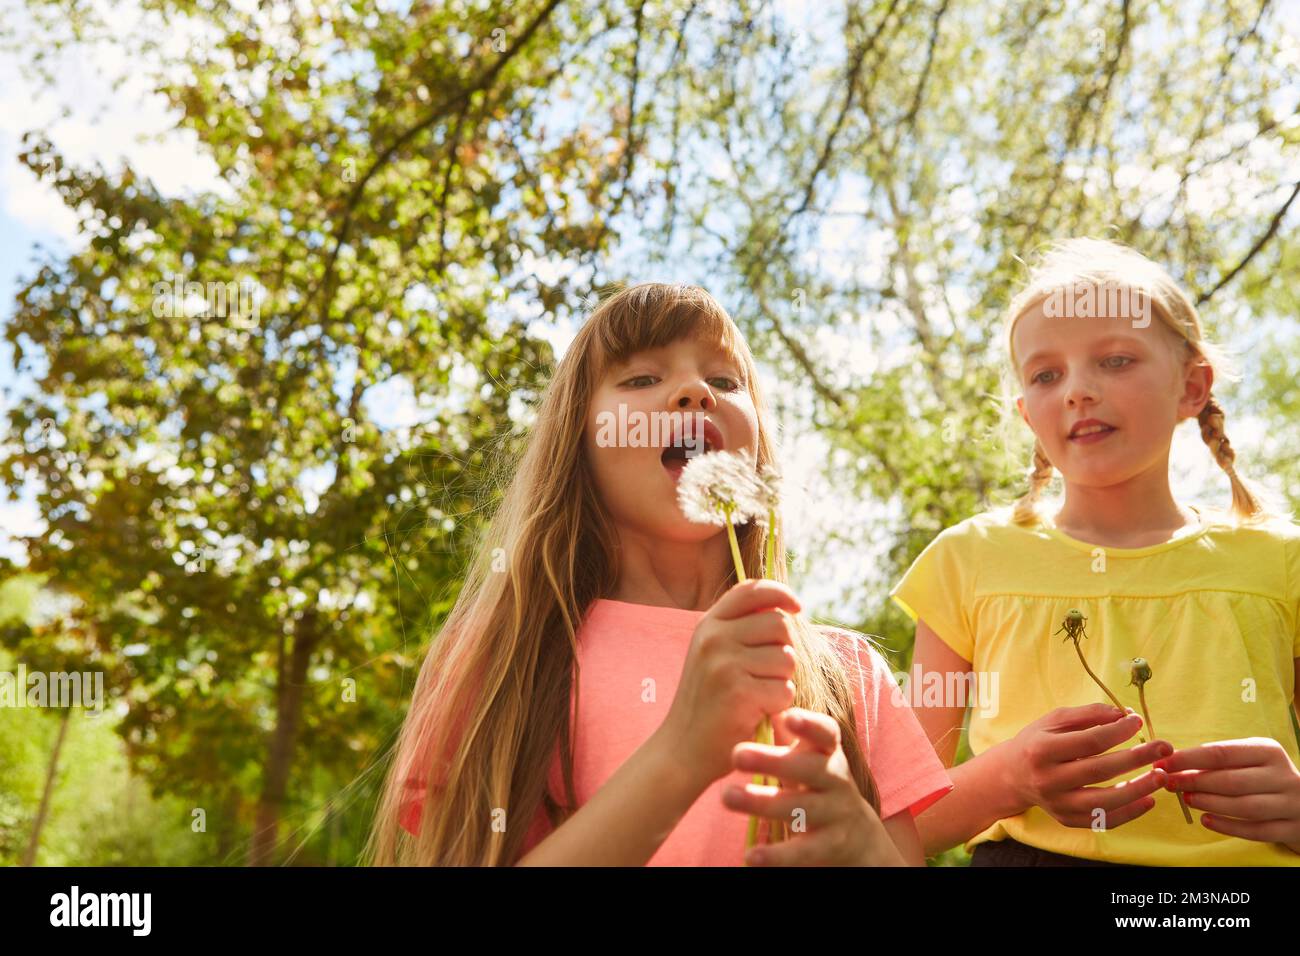 Elementary girl looking at female friend blowing dandelion in park on sunny day during vacation Stock Photo